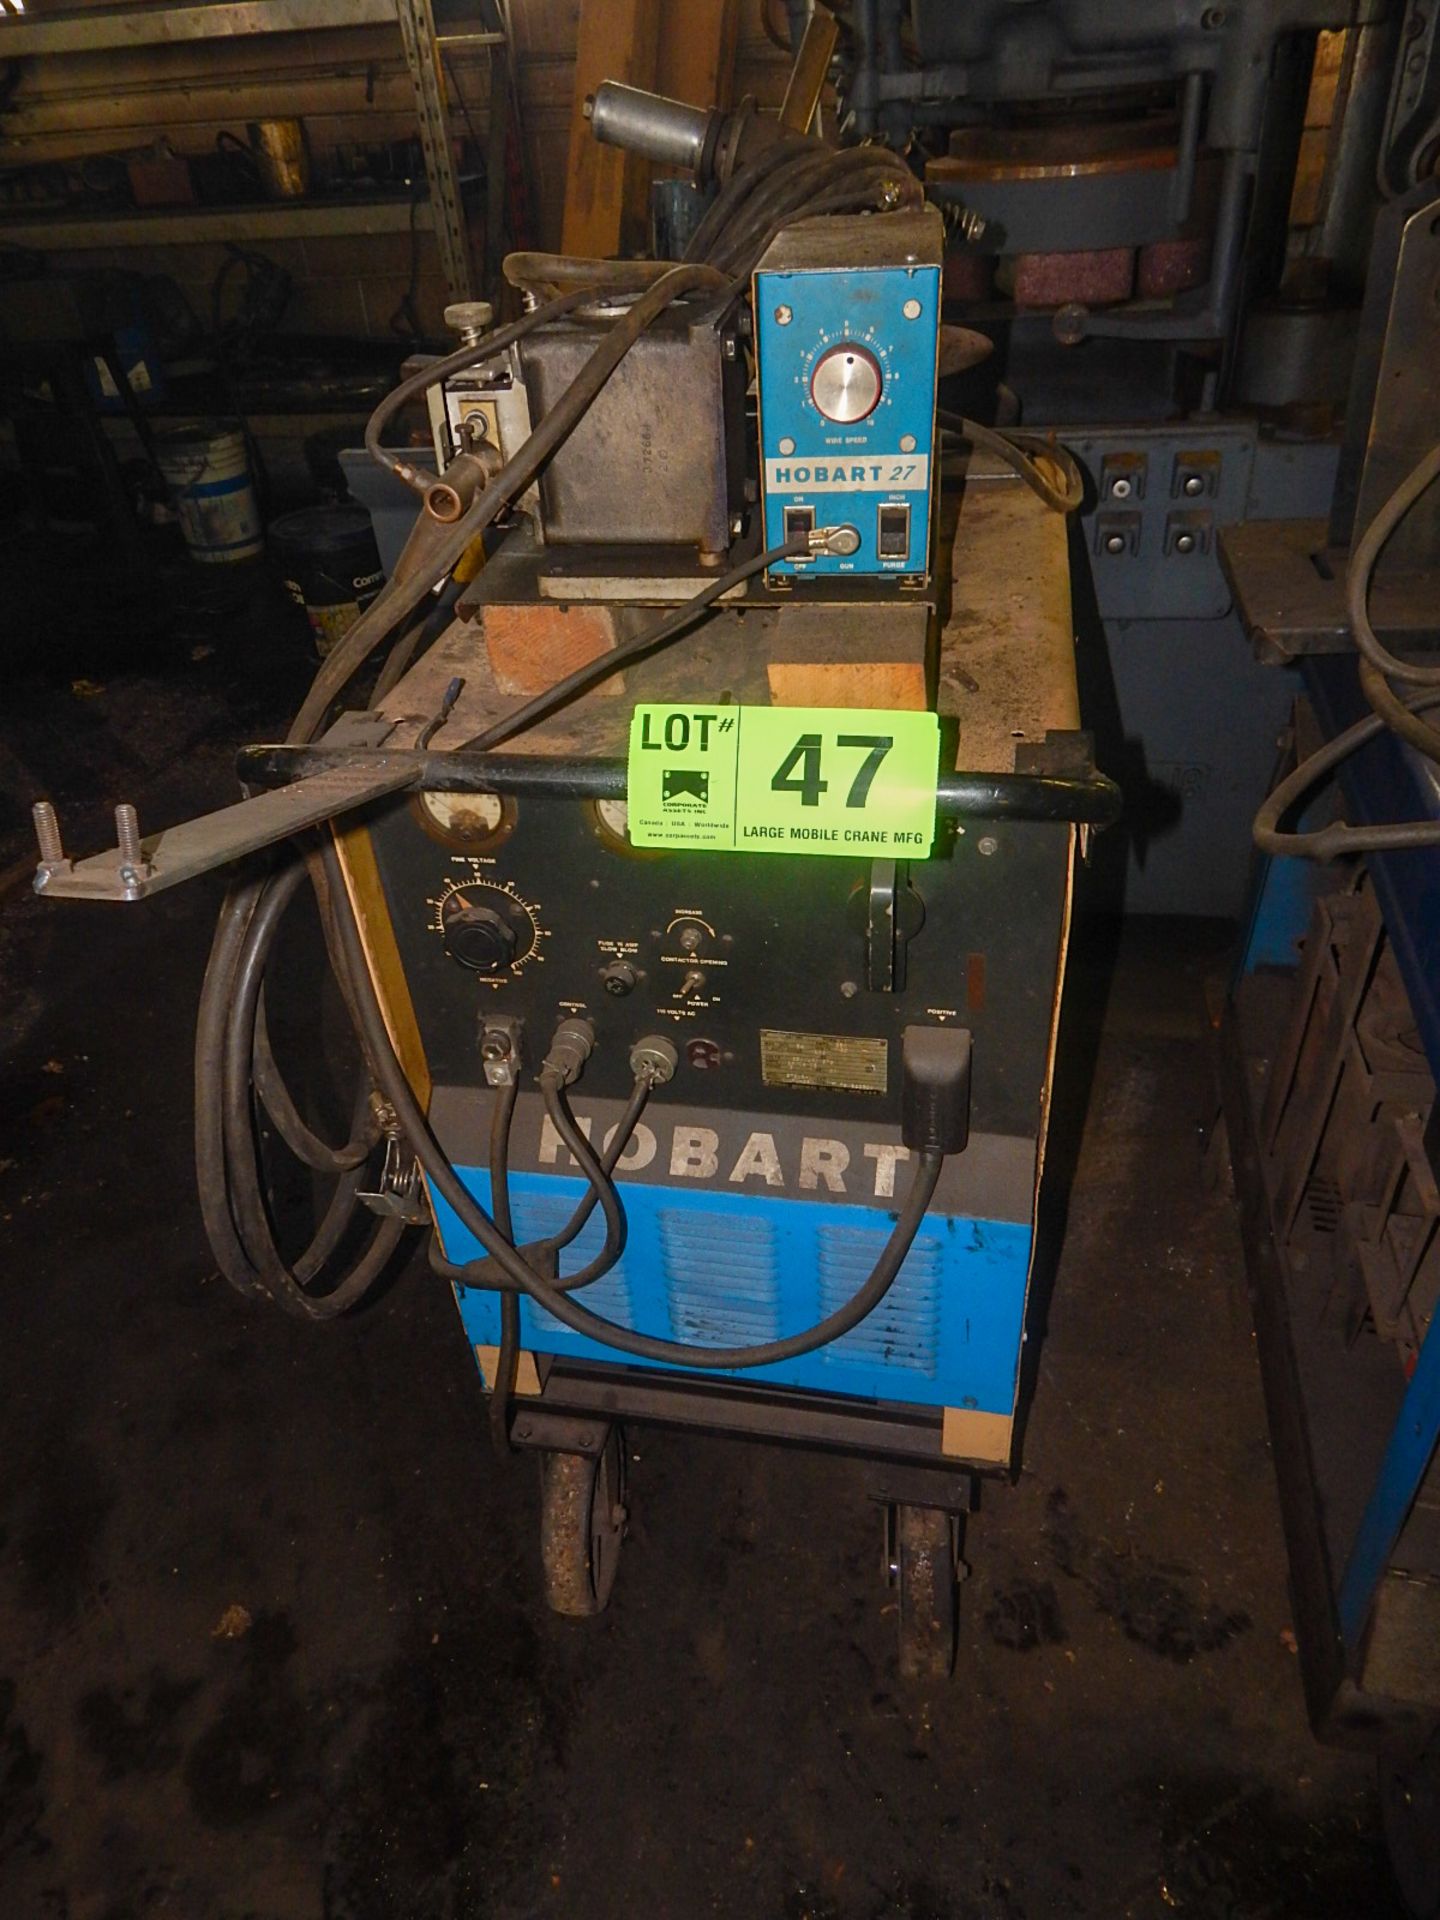 HOBART RC-250 PORTABLE MIG WELDER WITH HOBART 27 WIRE FEEDER, CABLES & GUN, S/N: 79WS22529